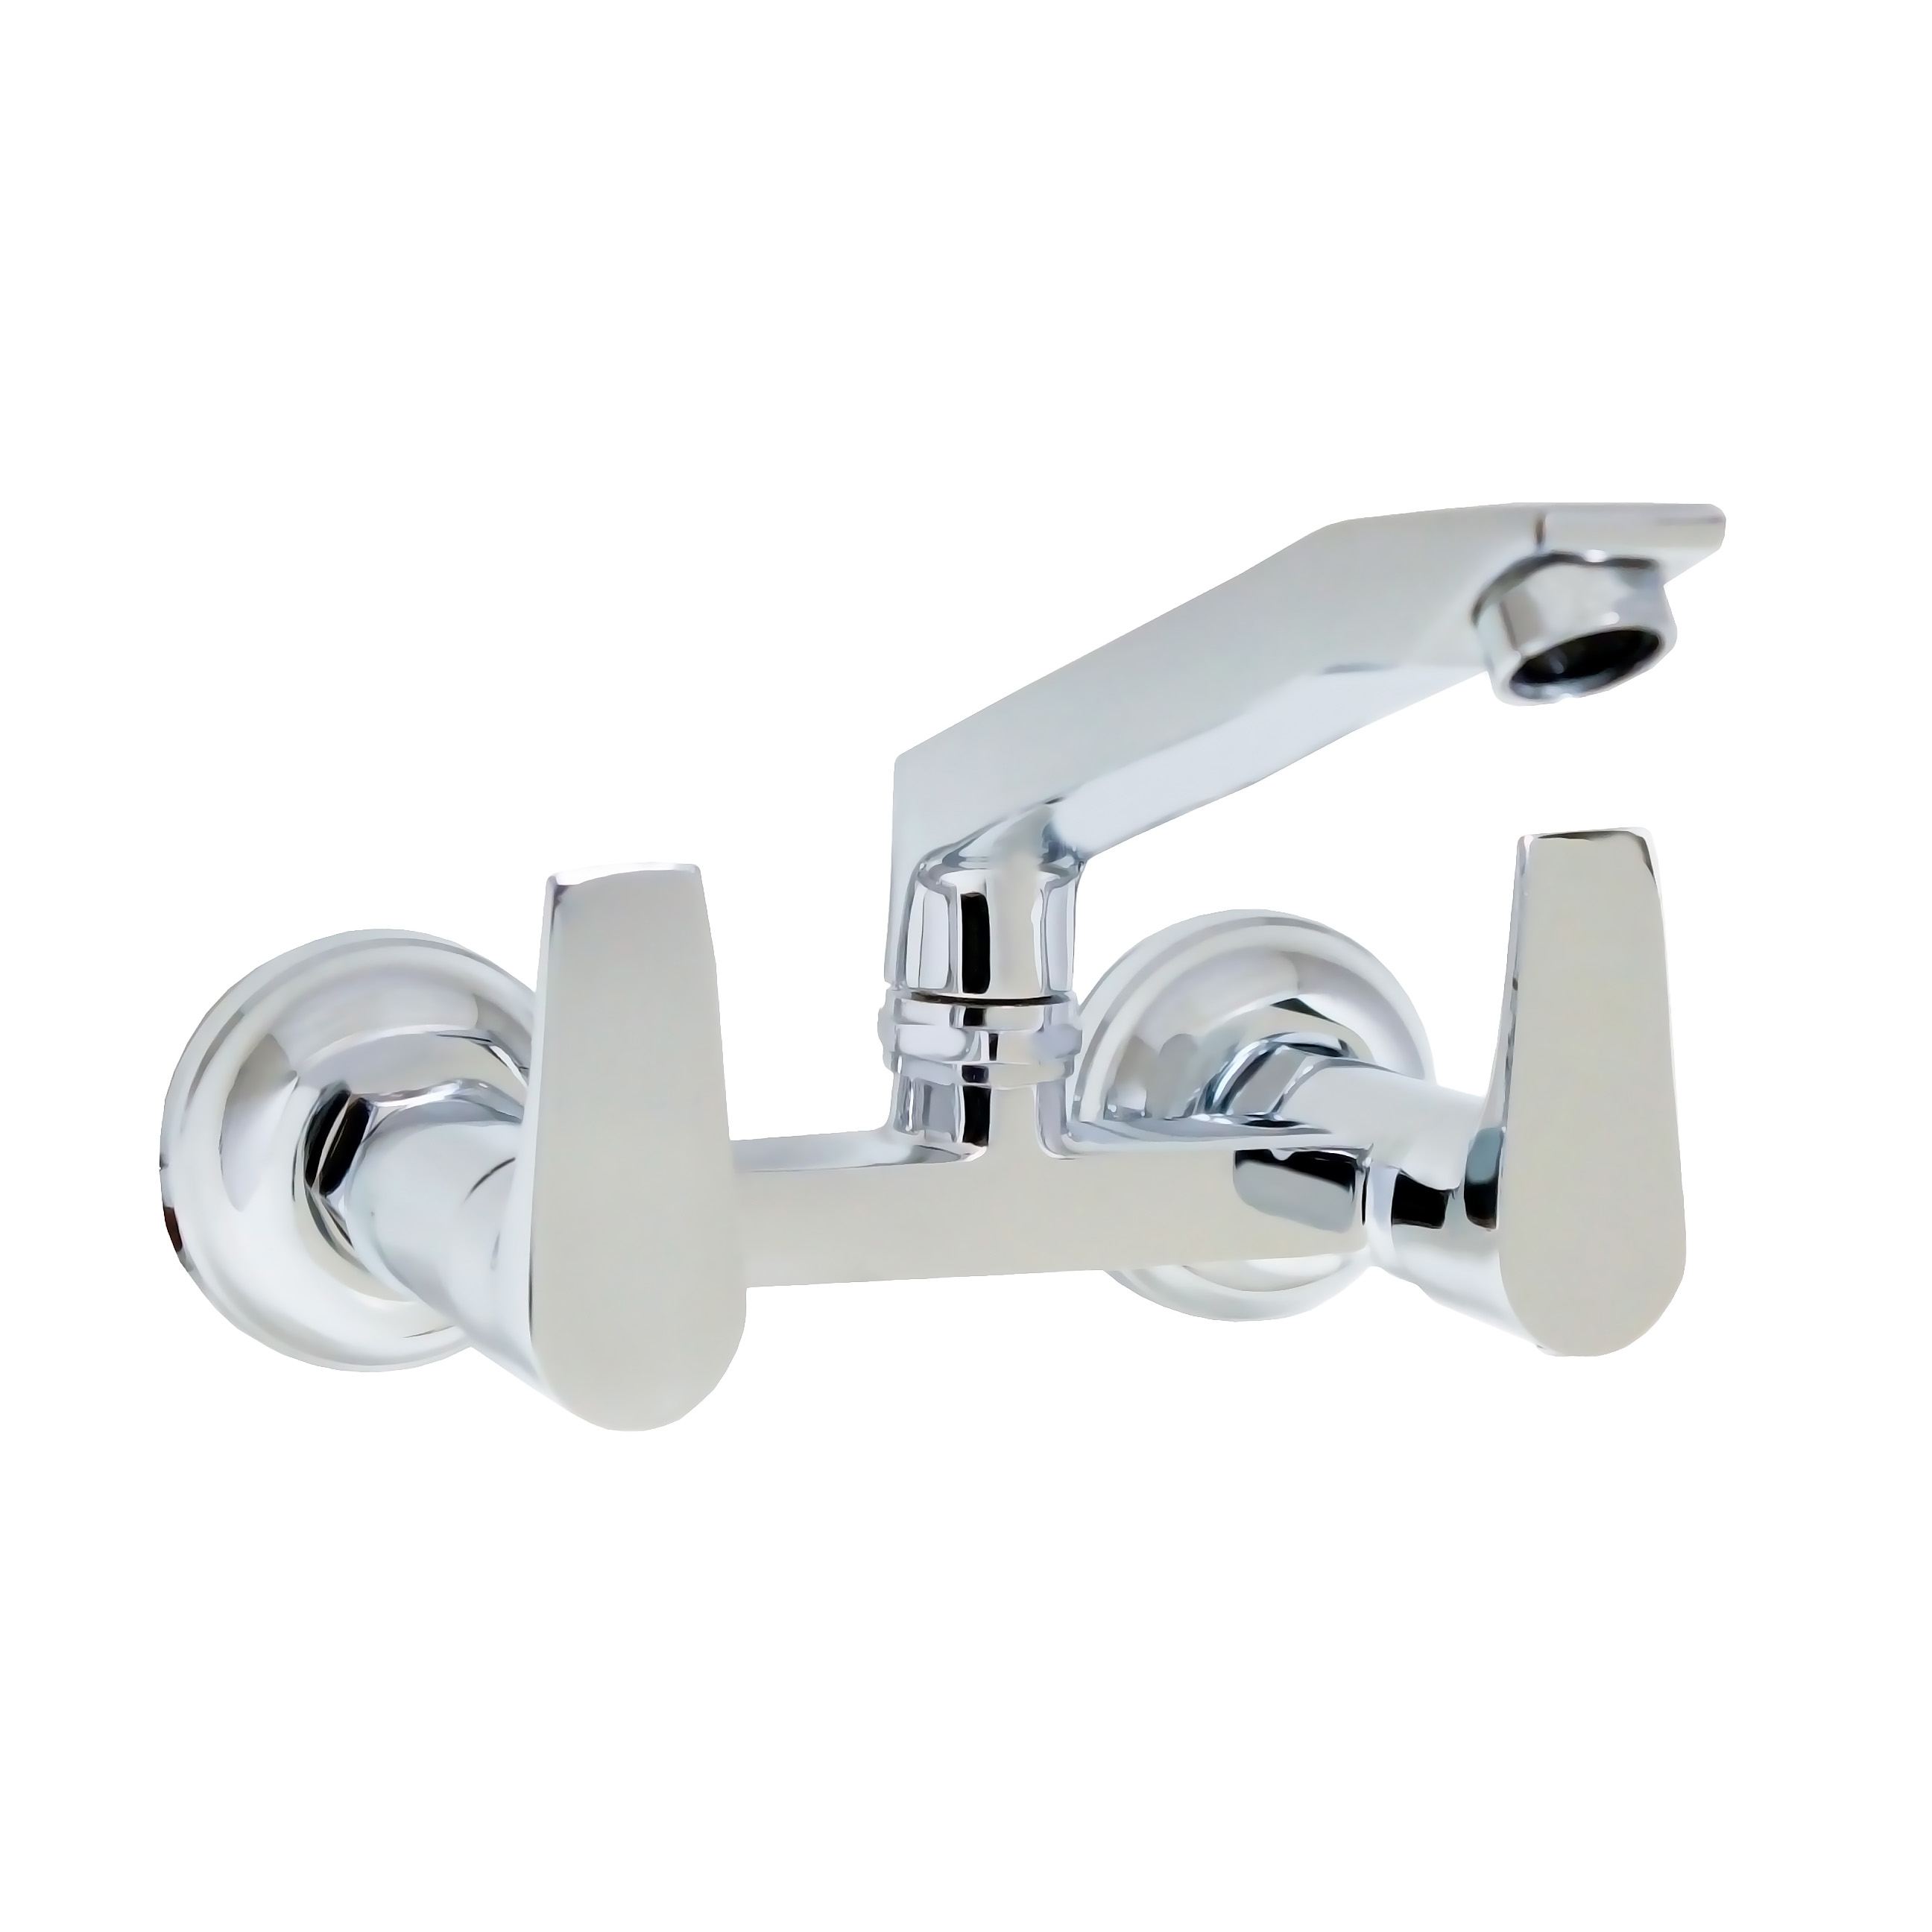 Fabia Sink Mixer With Swivel Spout